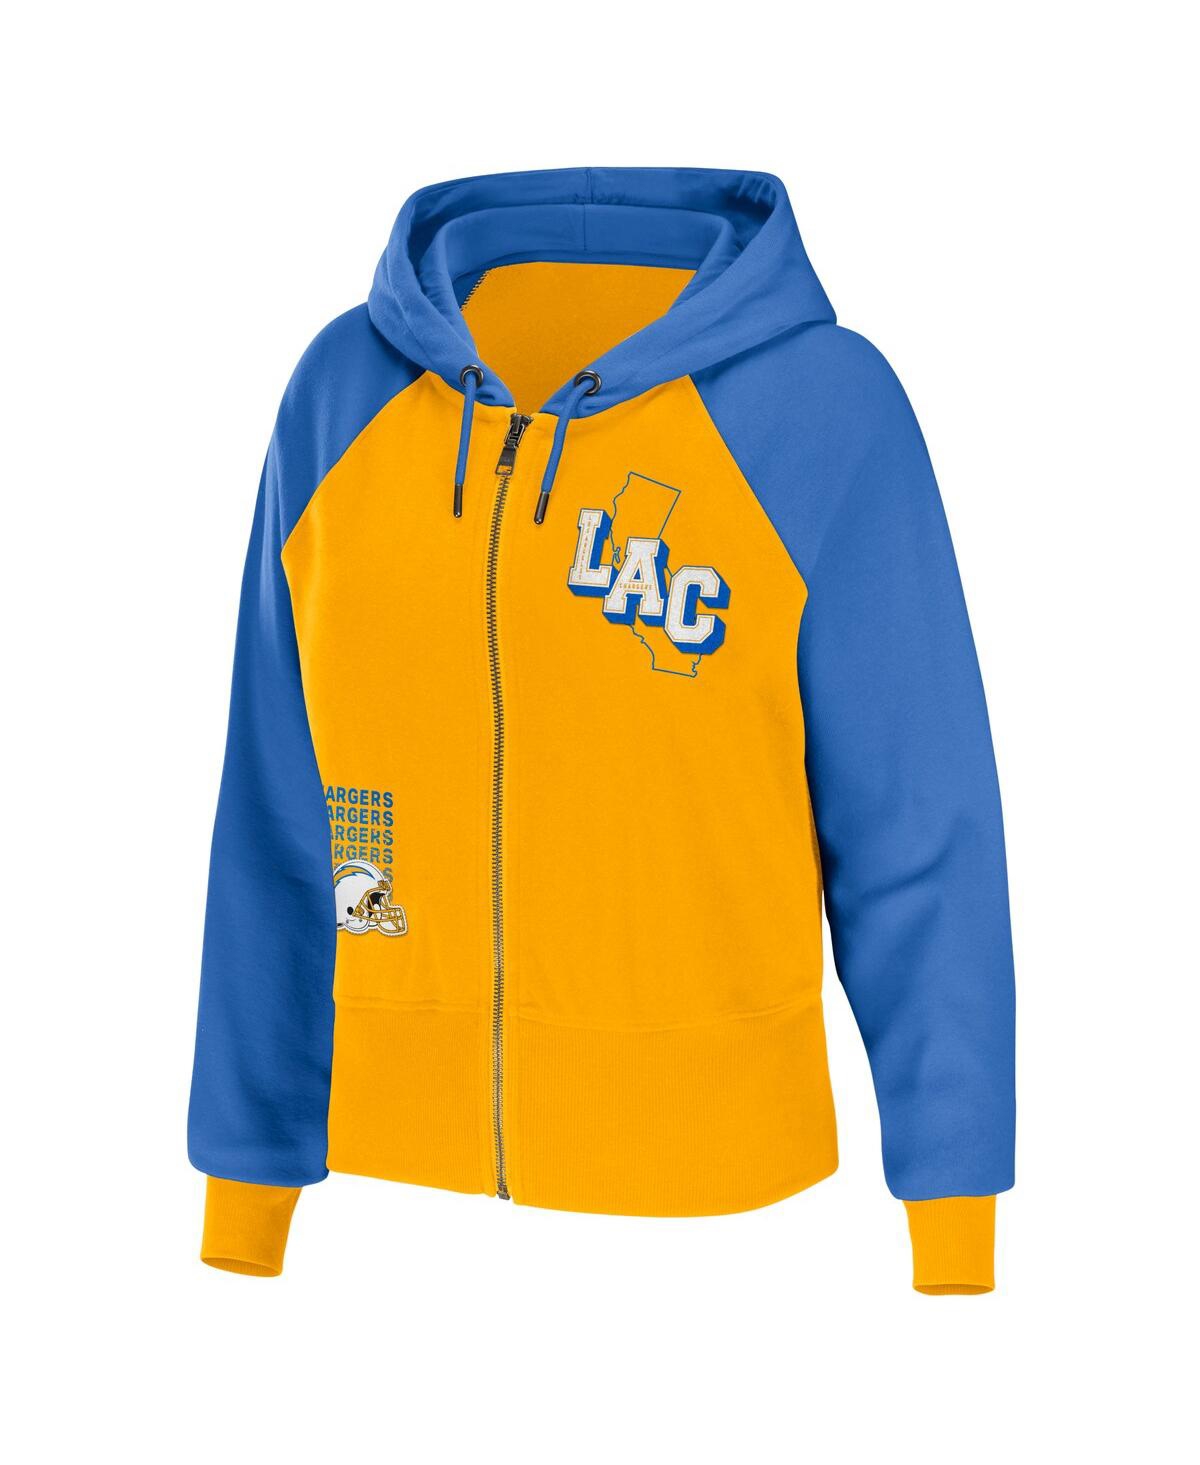 Shop Wear By Erin Andrews Women's  Gold Los Angeles Chargers Colorblock Full-zip Hoodie